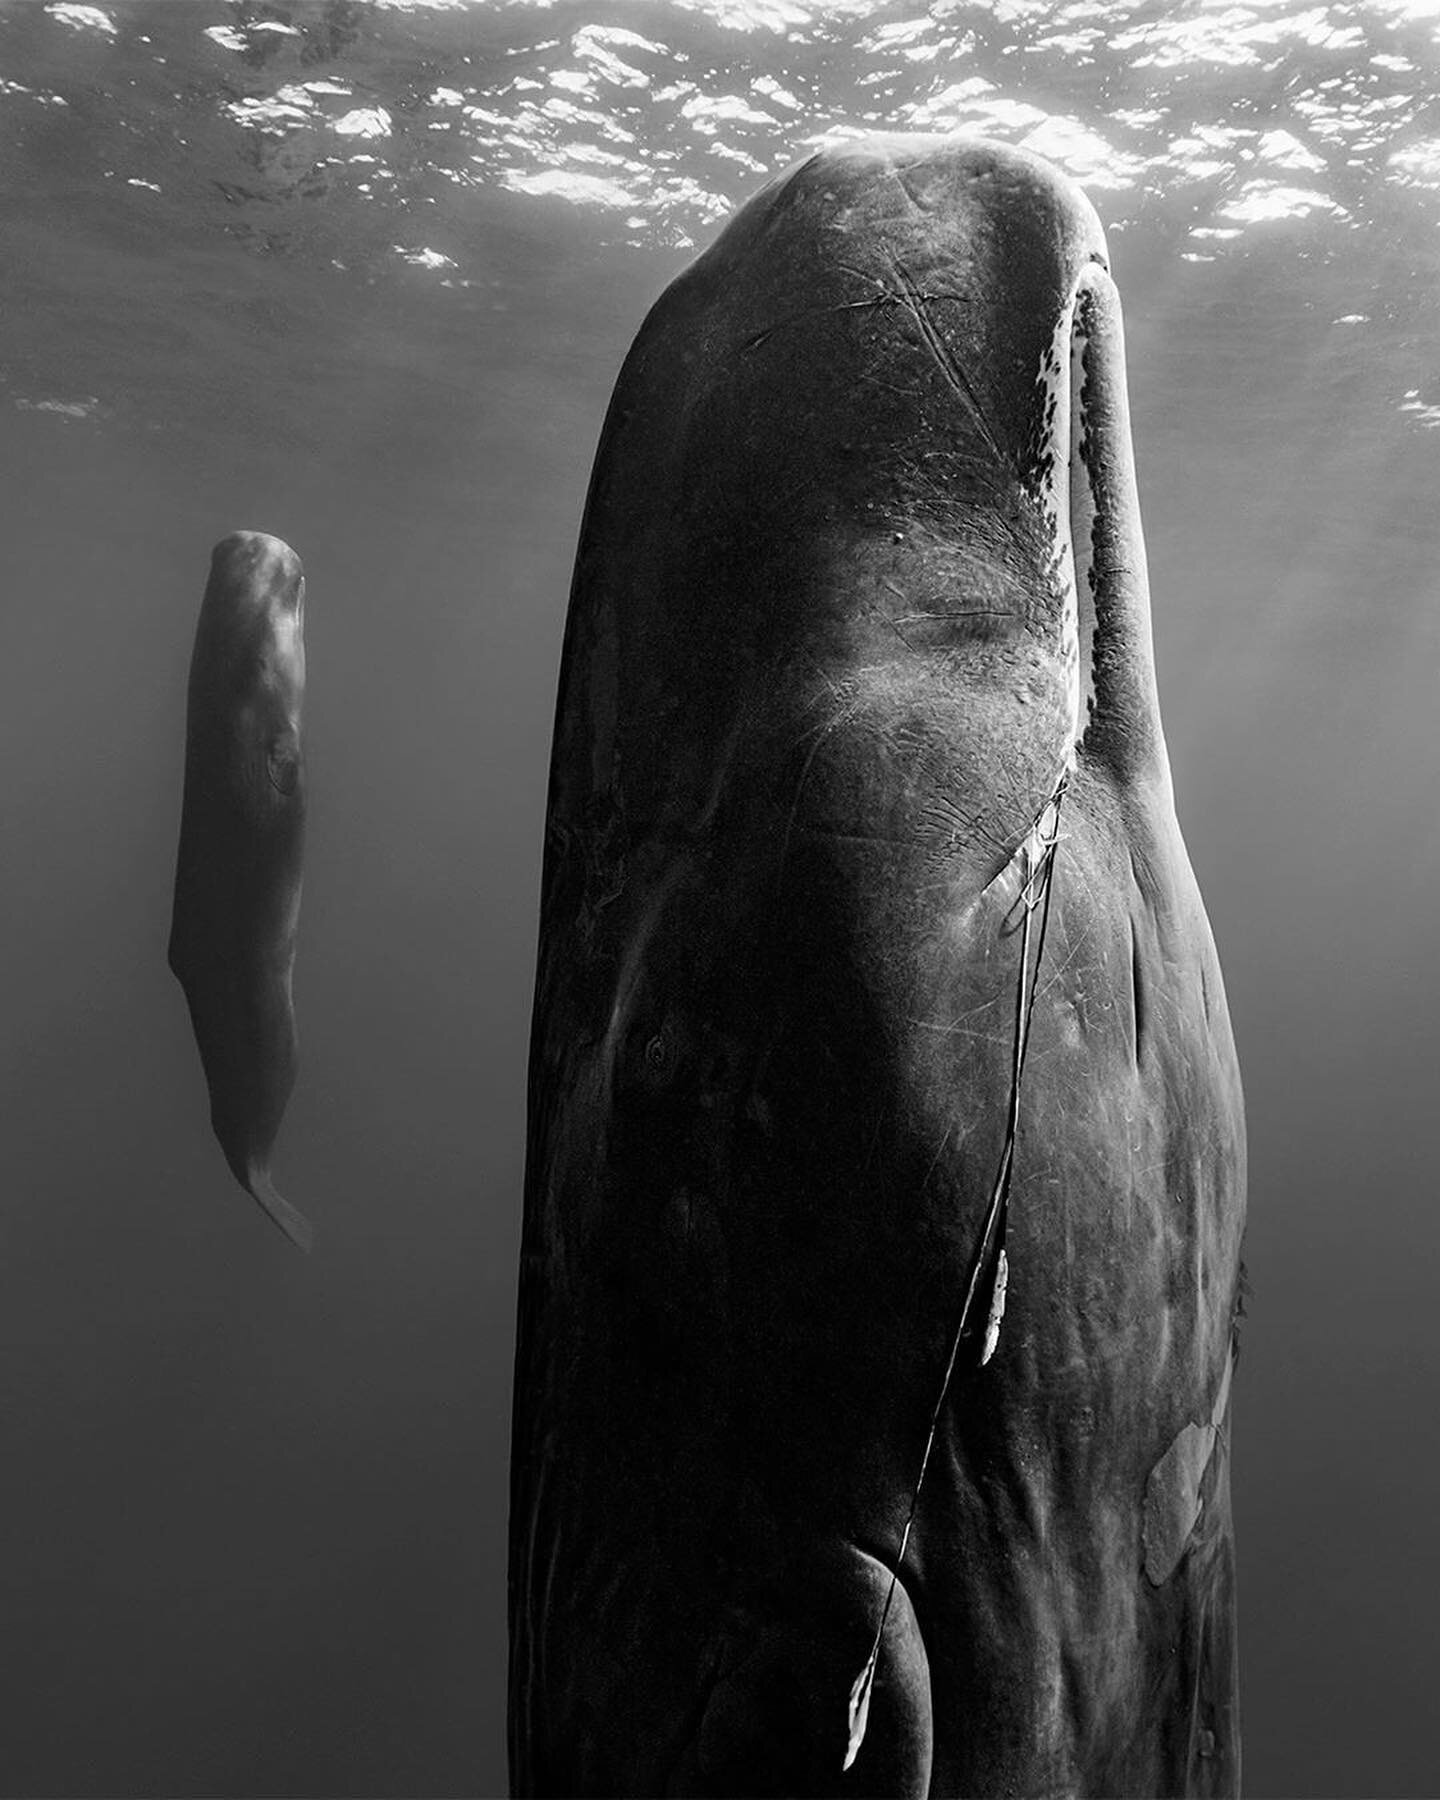 A mother sperm whale and her calf. @paulnicklen has outdone himself here 😯
.
.
.
.
.
#paulnicklen #sealegacy #spermwhale #whale #whales #whalesofinstagram #whalewatching #whaleart #underwater #underwaterphotography #underwaterphotographer #underwate